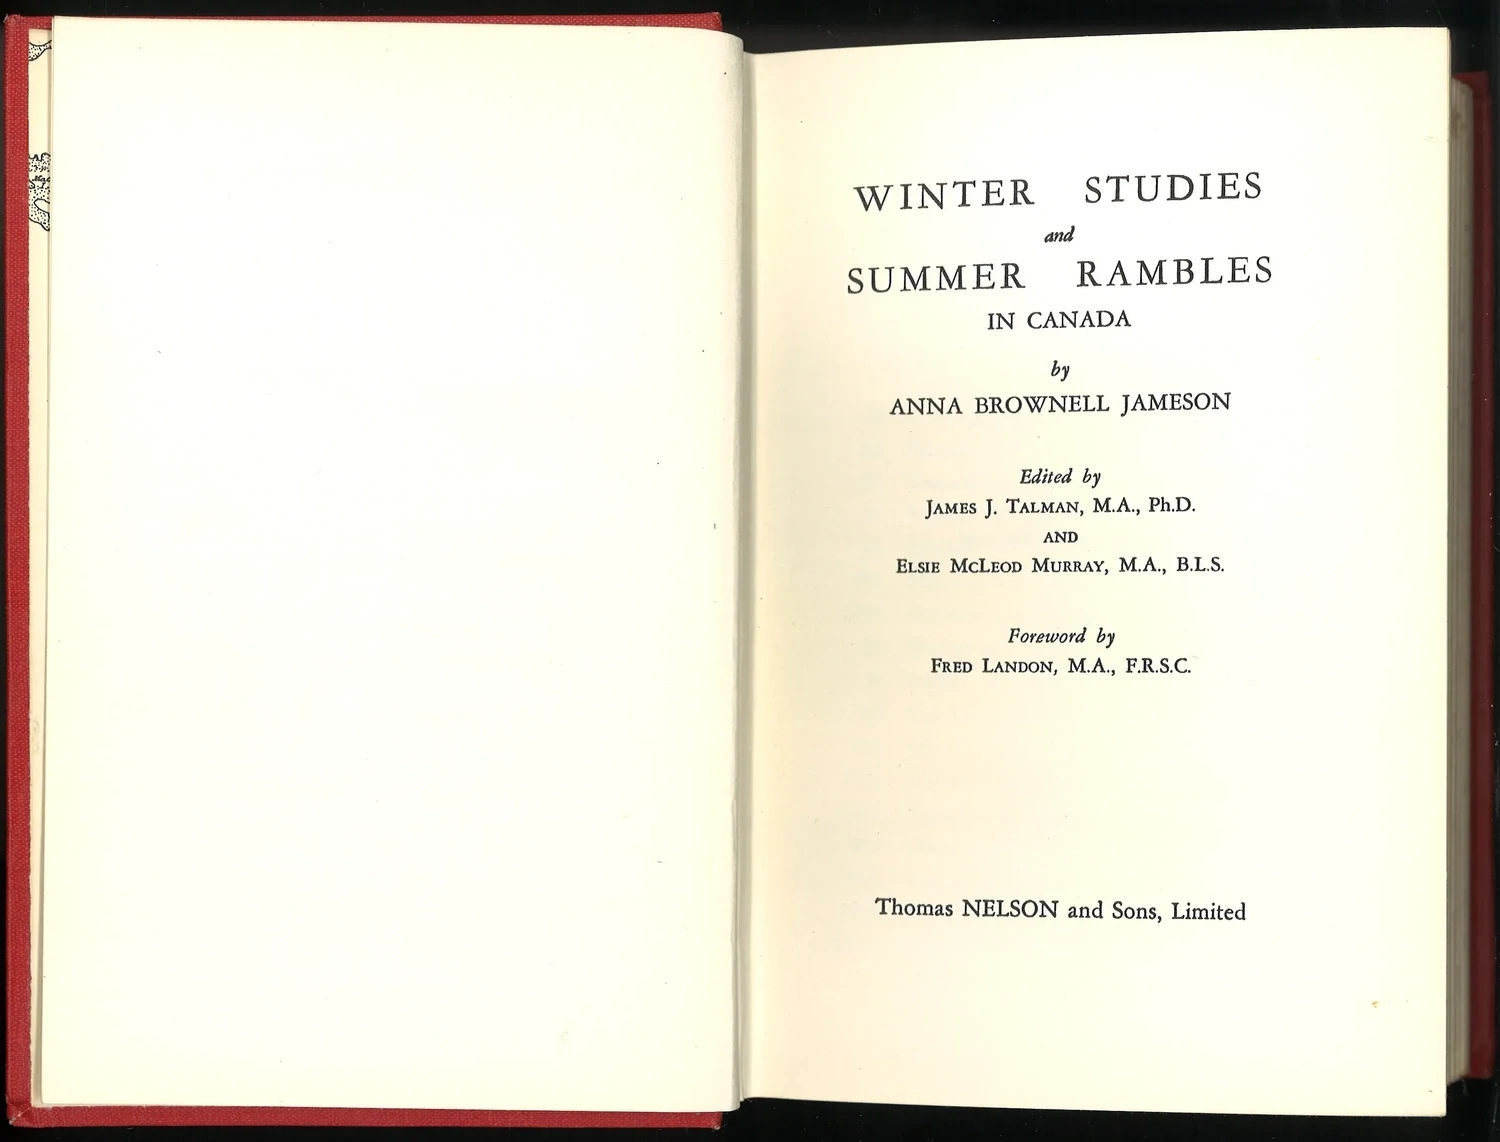 Winter Studies and Summer Rambles in Canada, Anna Brownell Jameson